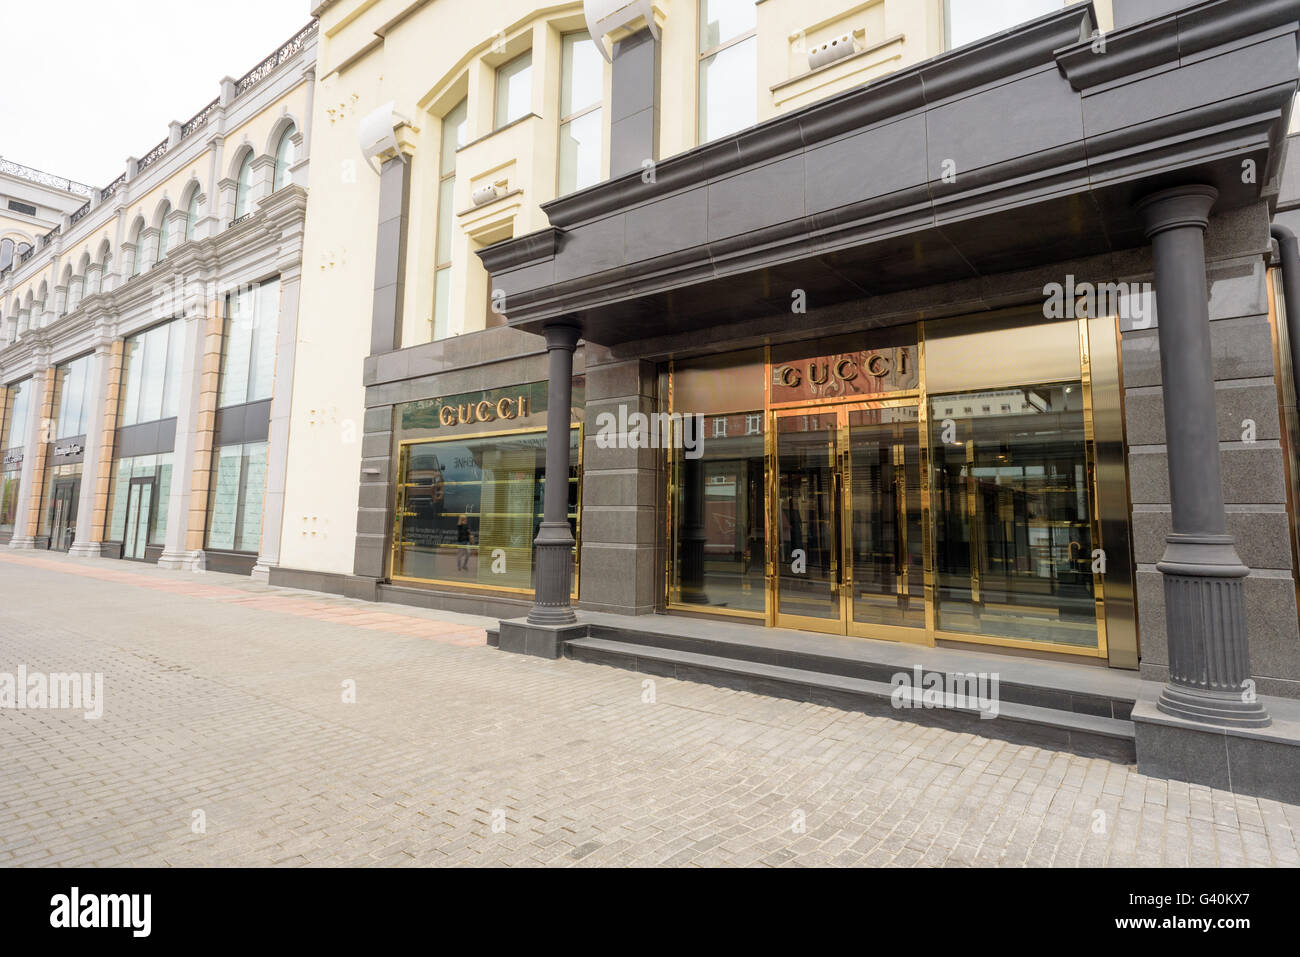 Gucci Shop High Resolution Stock Photography and Images - Alamy